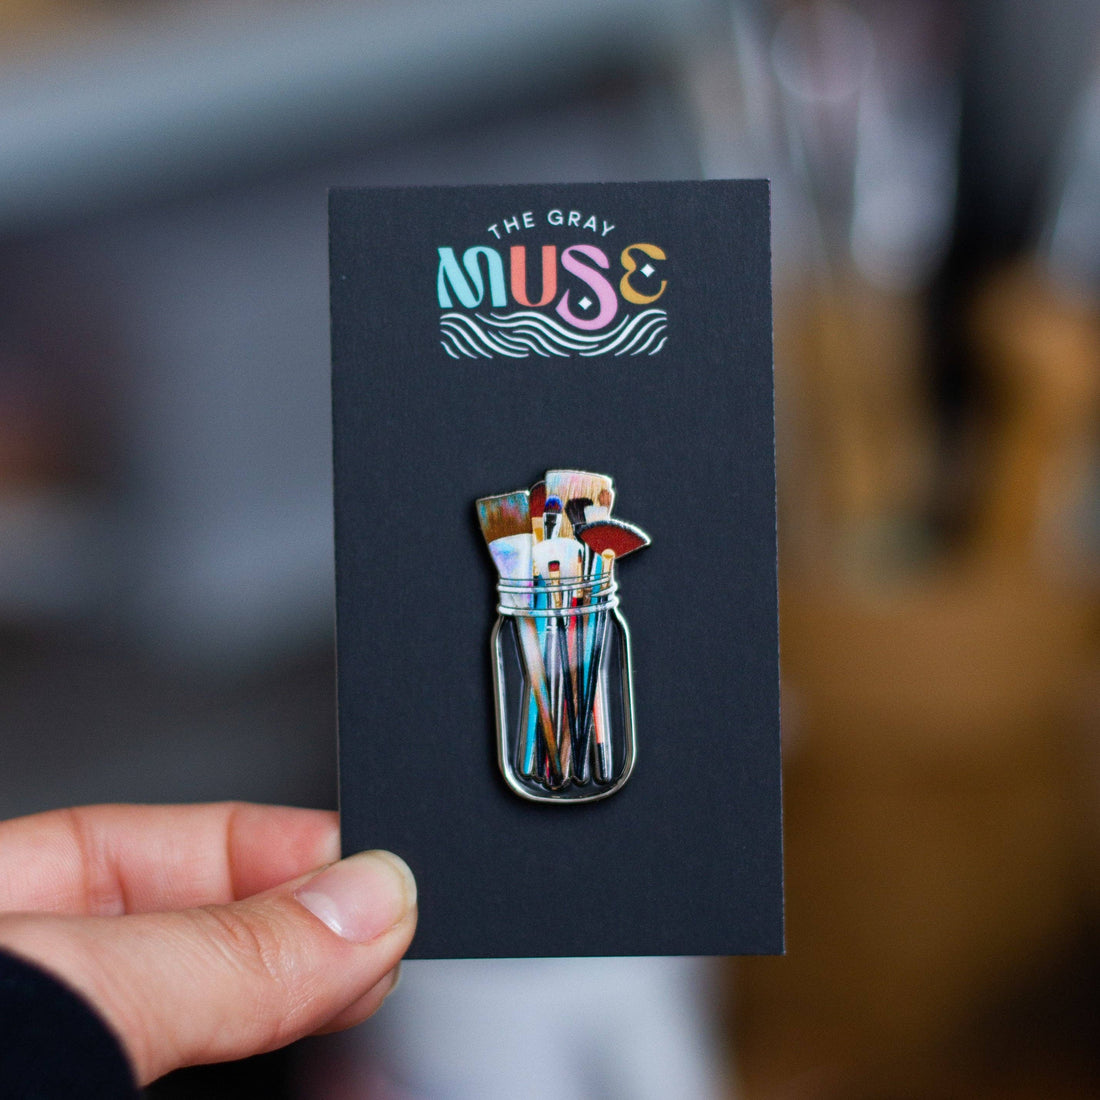 Paint Brushes in Clear Jar Enamel Pin